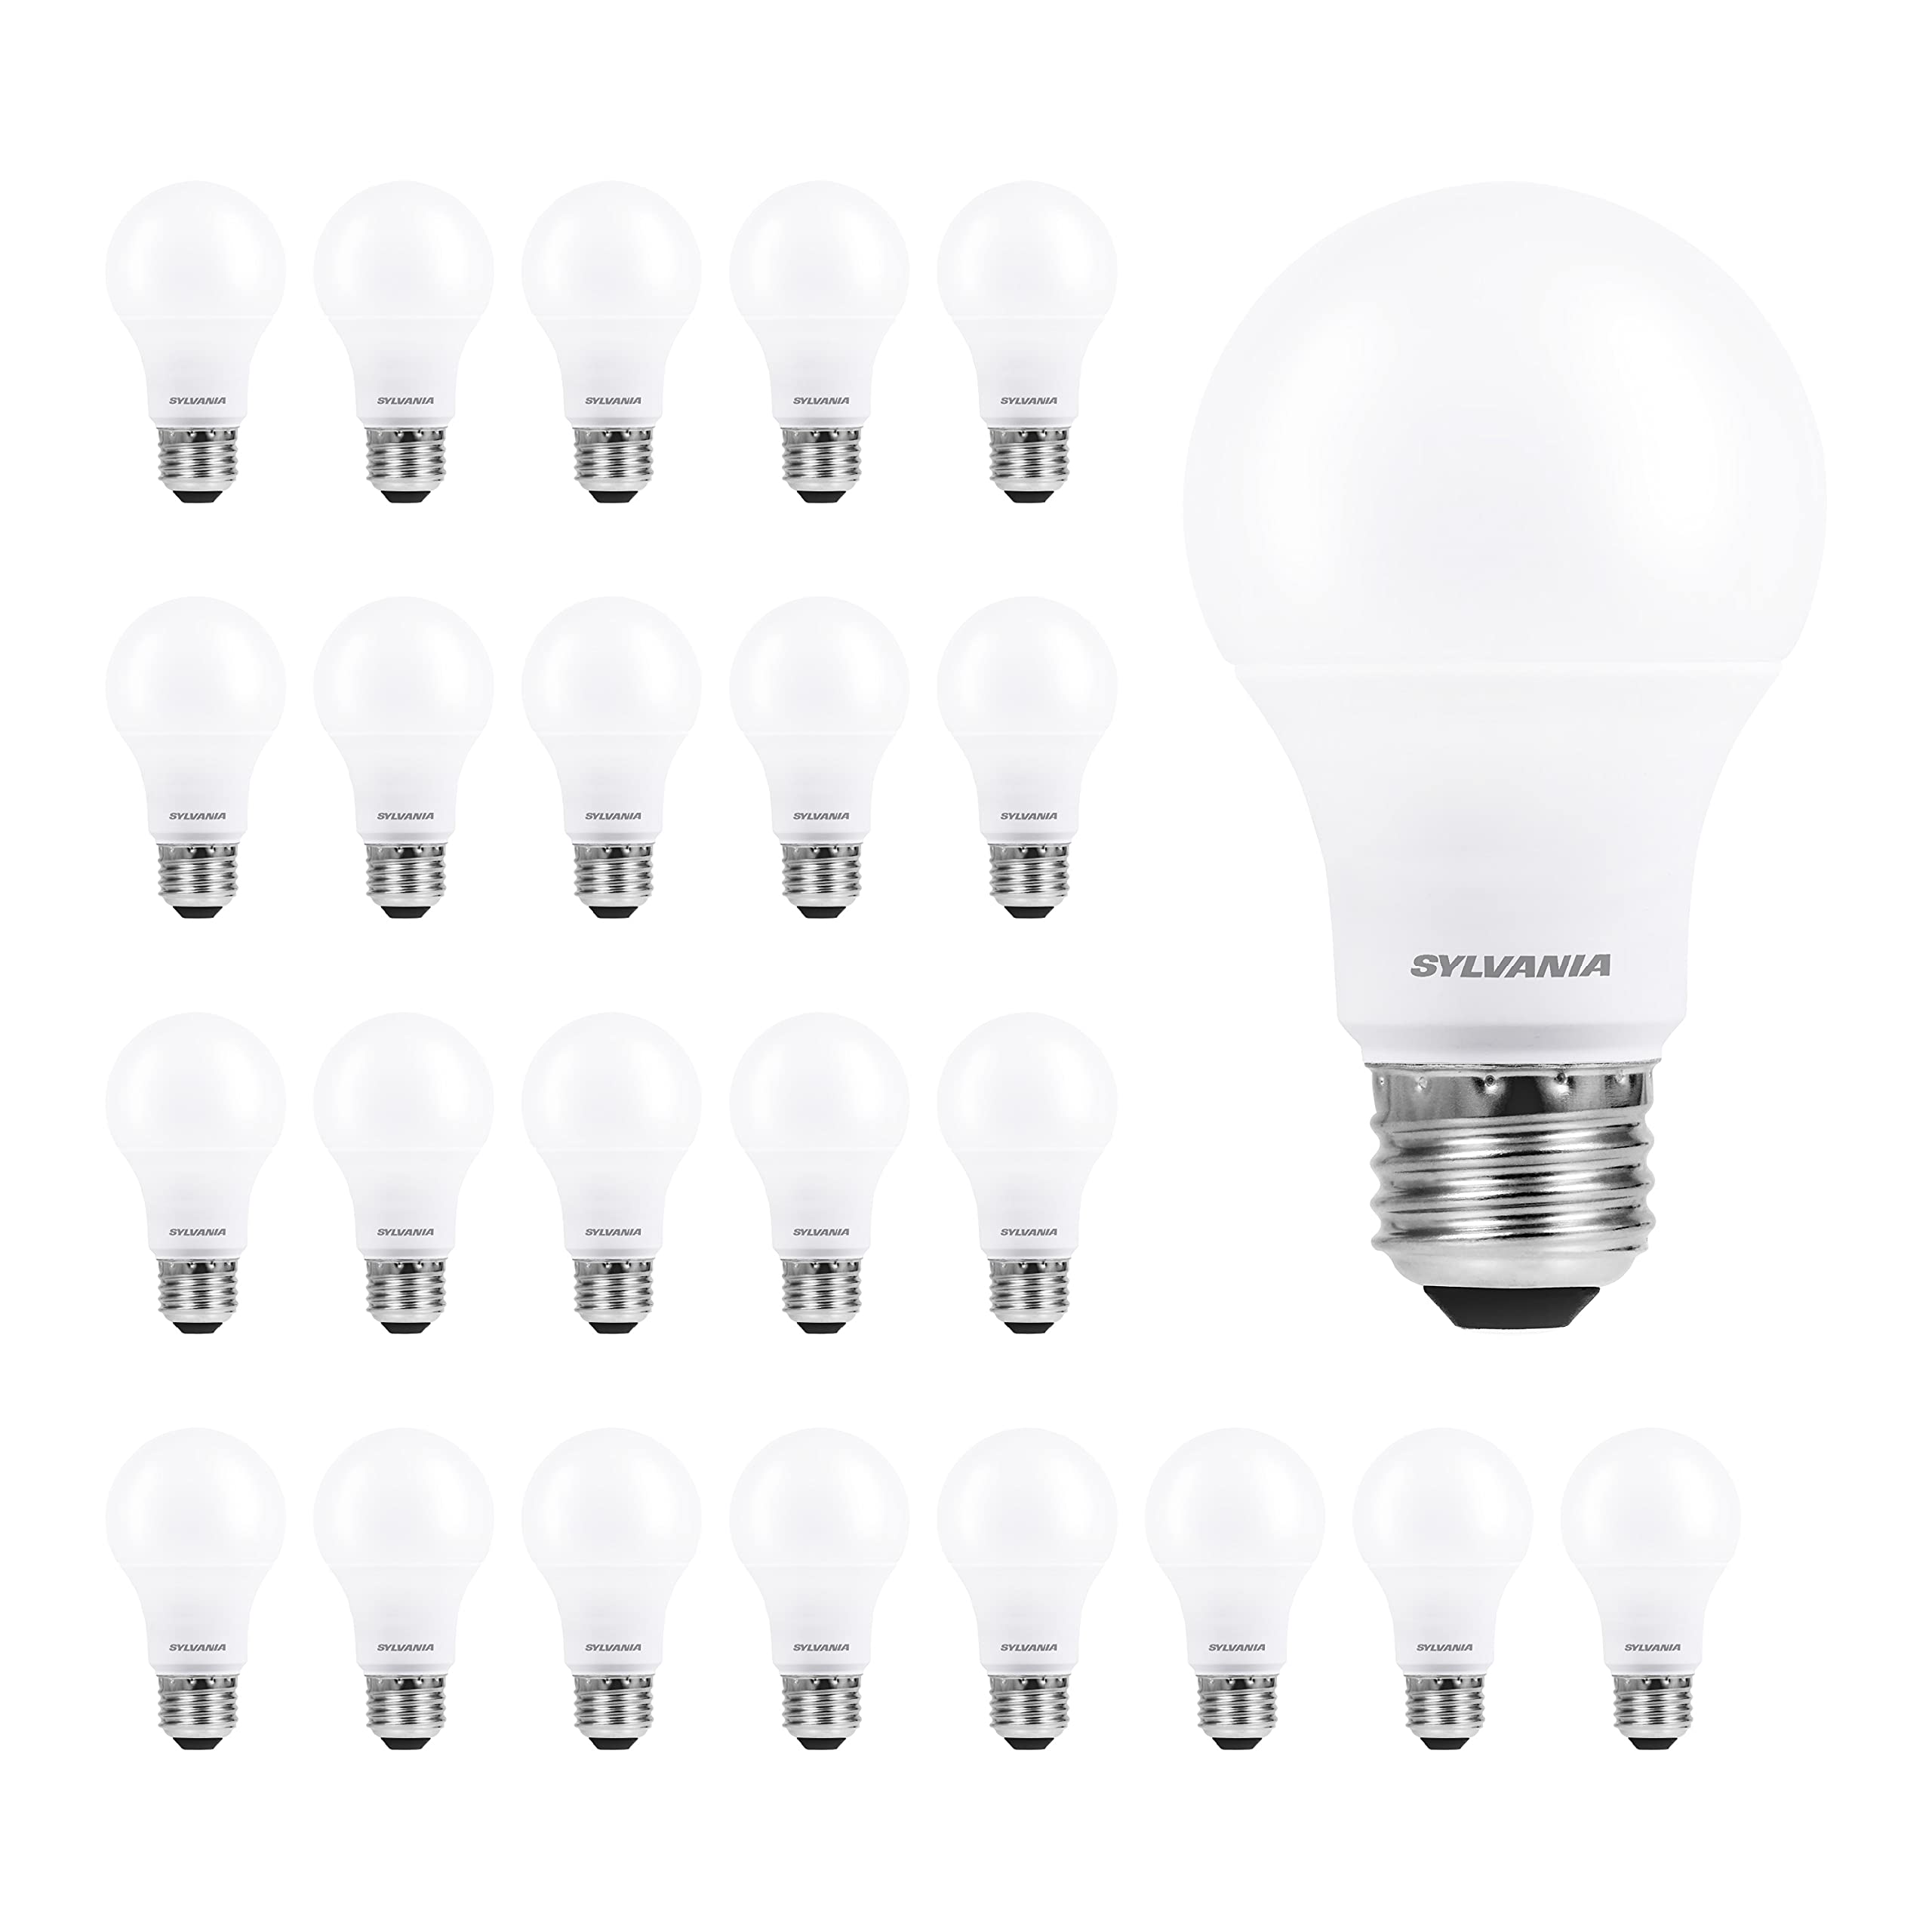 LEDVANCE Sylvania Eco Led A19 Light Bulb, 60W Equivalent, Efficient 9W, 7 Year, 750 Lumens, Non-Dimmable, Frosted, 5000K Daylight - 24 Pa